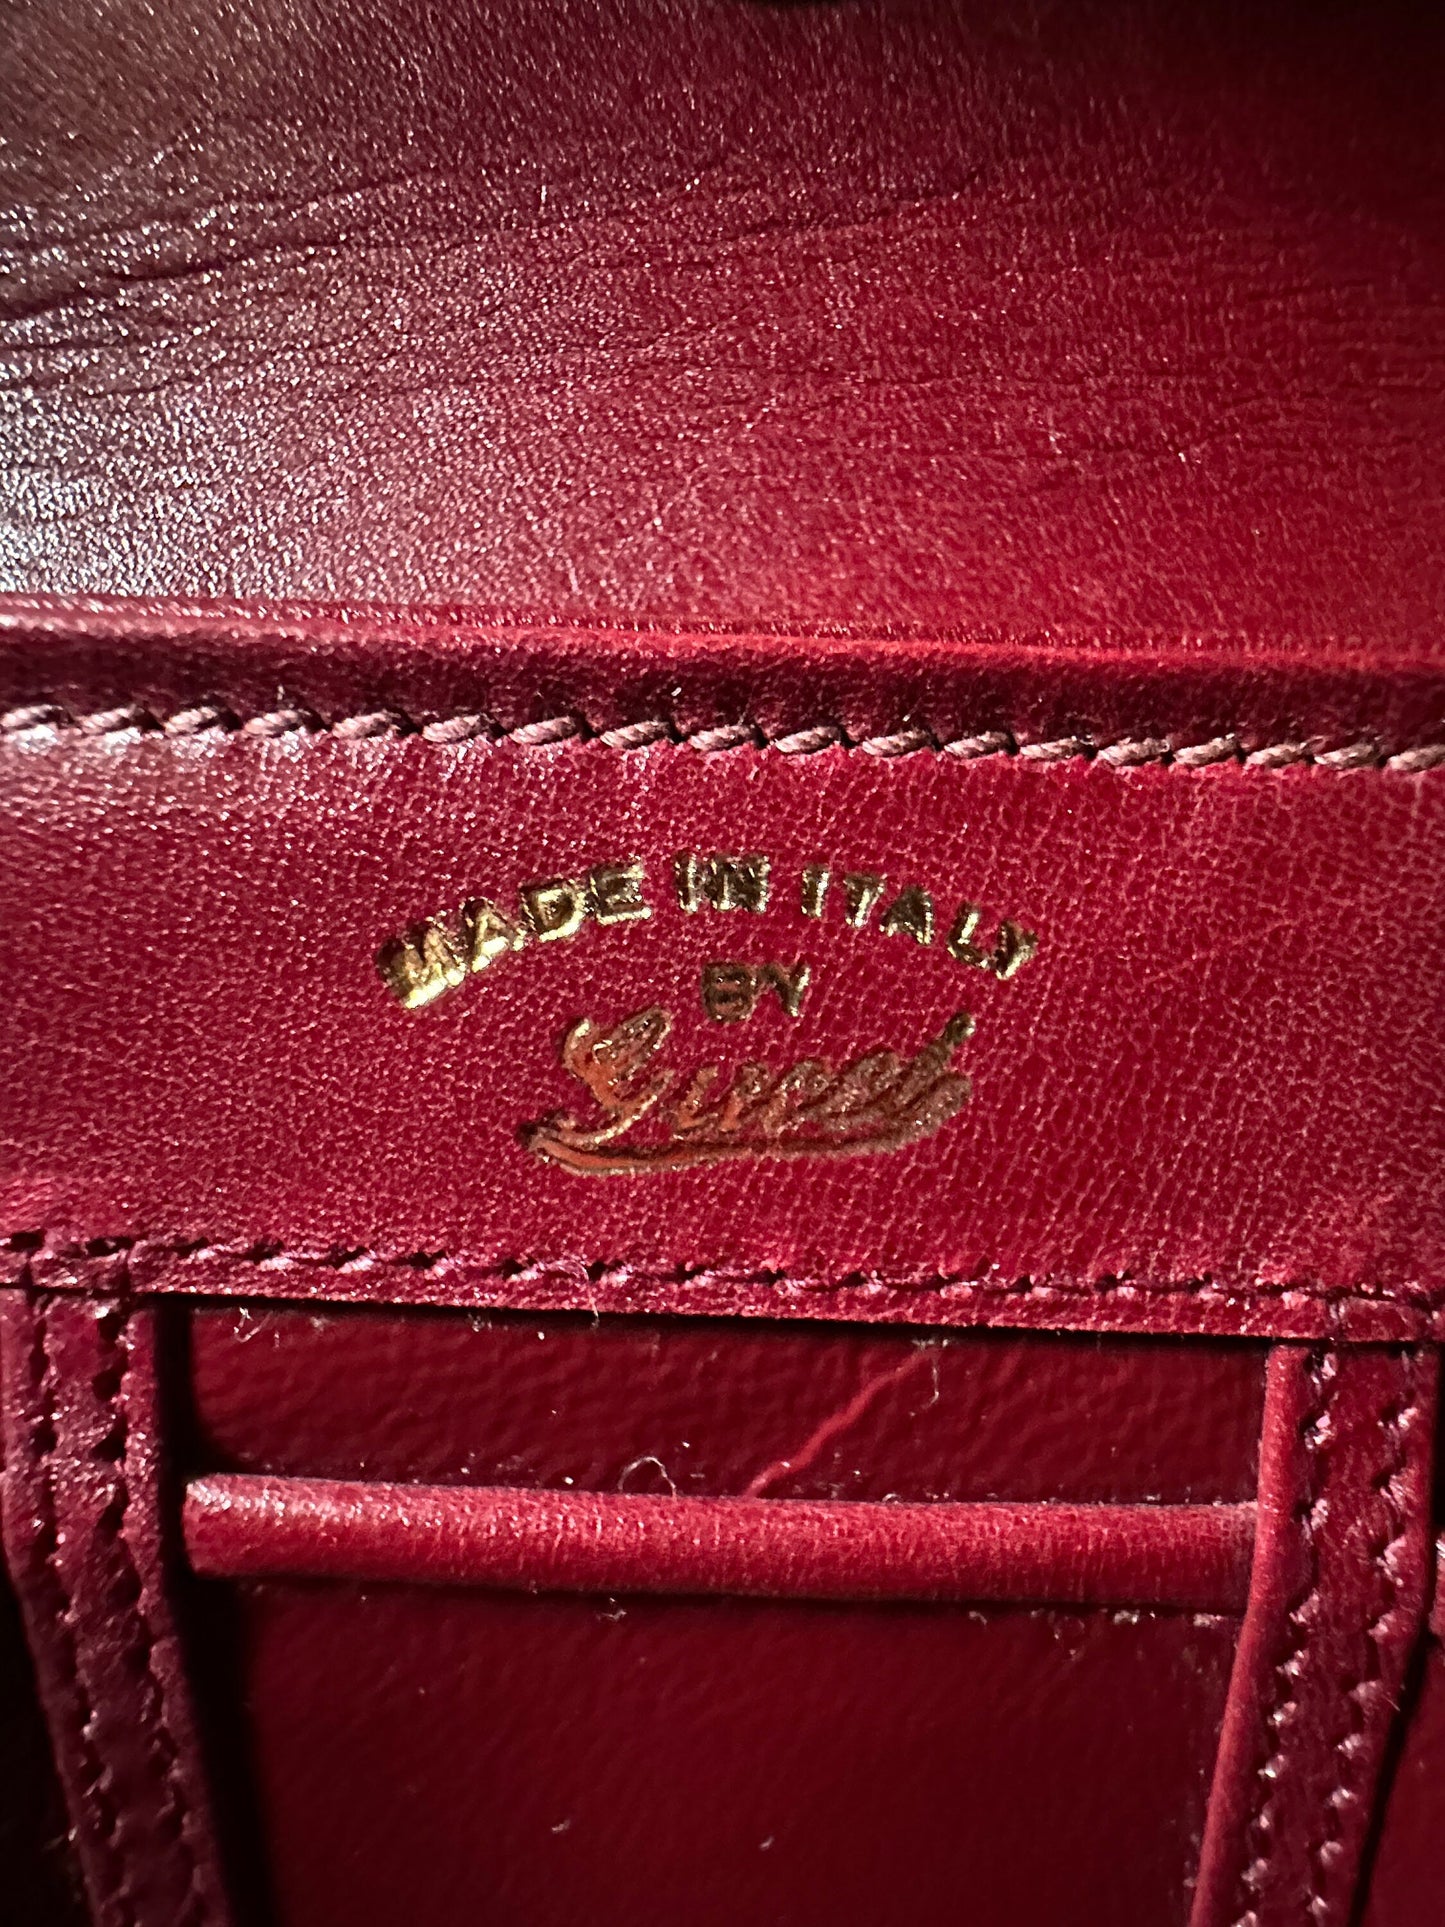 GUCCI VINTAGE 100% Authentic Genuine Leather Shoulder Bag, Dark Wine Red, late 80's, Great Condition, Rare, Grade A